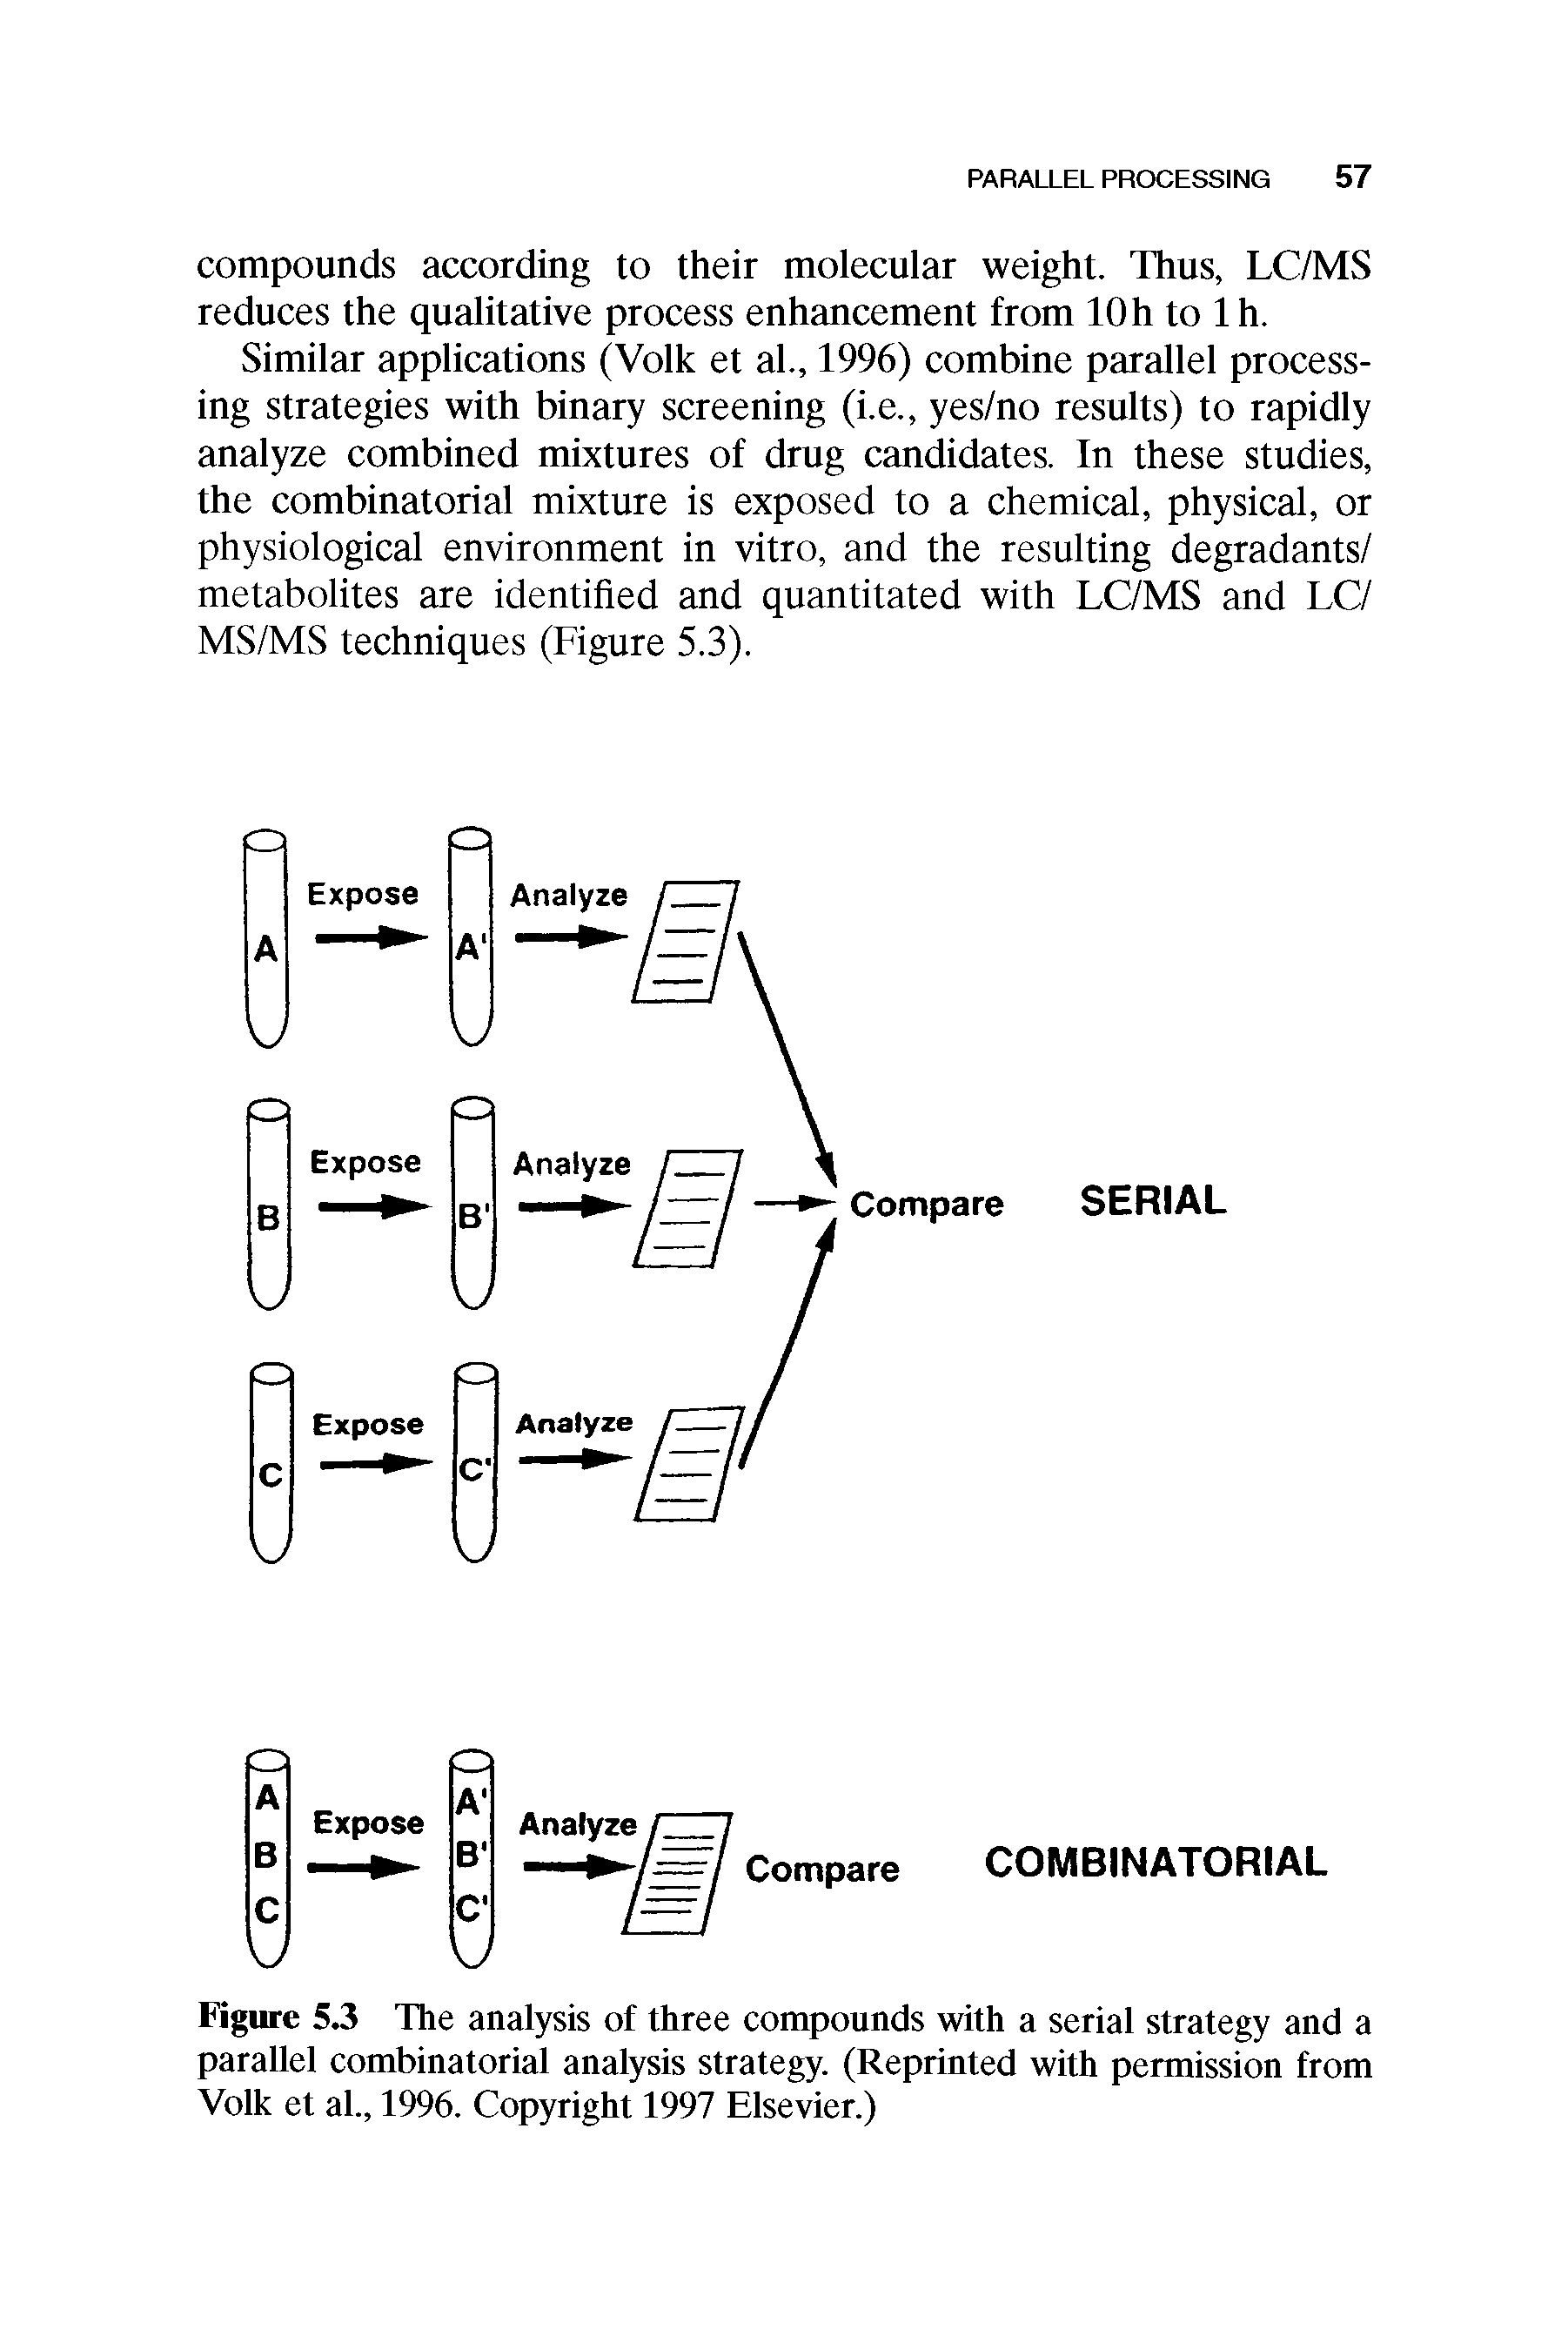 Figure 5.3 The analysis of three compounds with a serial strategy and a parallel combinatorial analysis strategy. (Reprinted with permission from Volk et al., 1996. Copyright 1997 Elsevier.)...